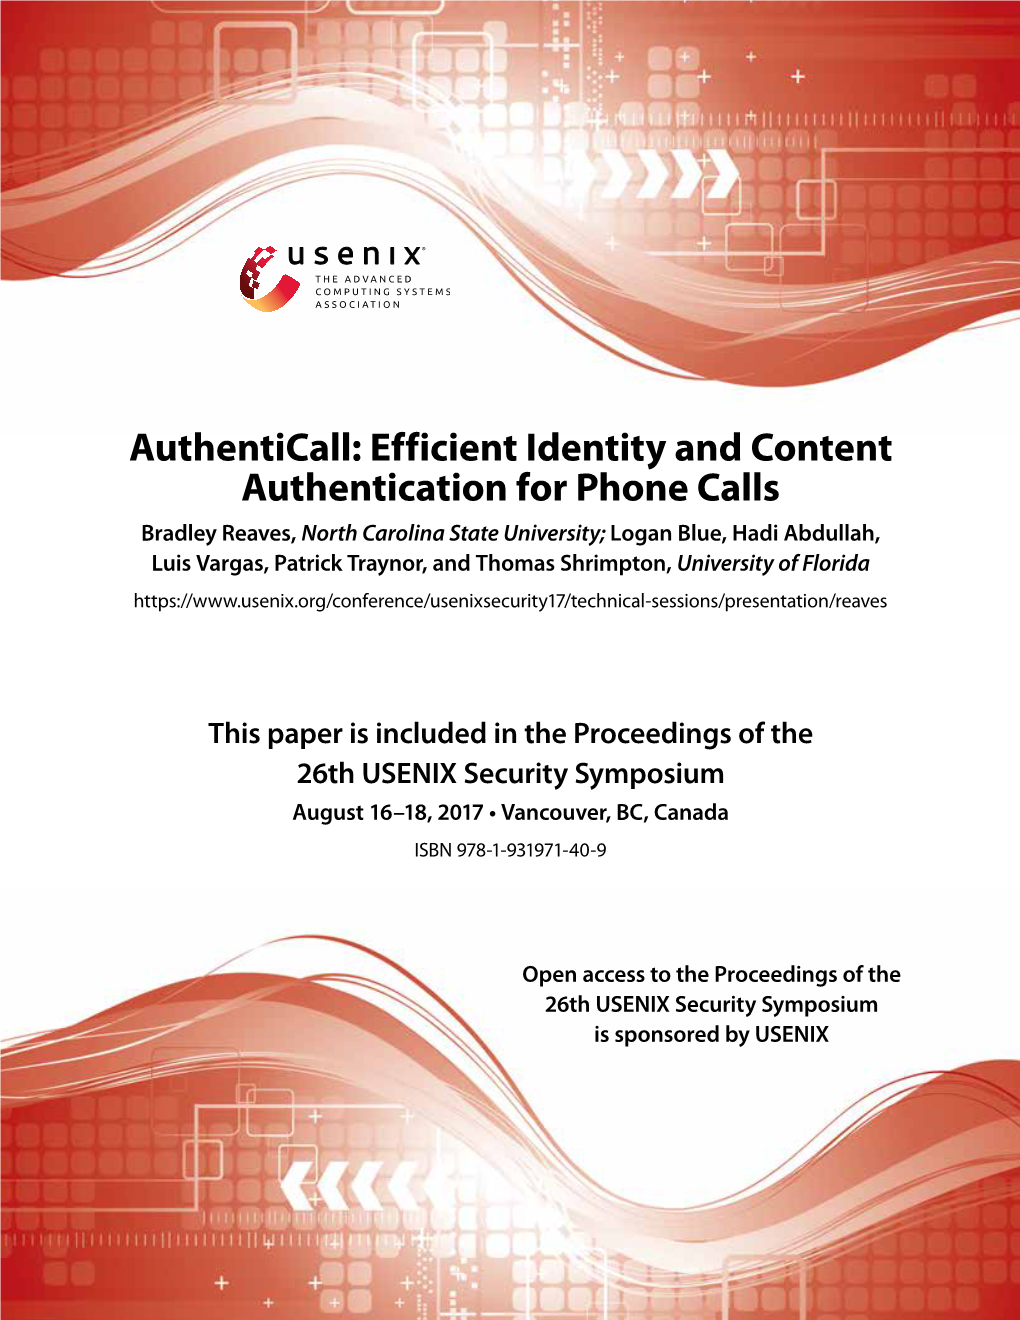 Authenticall: Efficient Identity and Content Authentication for Phone